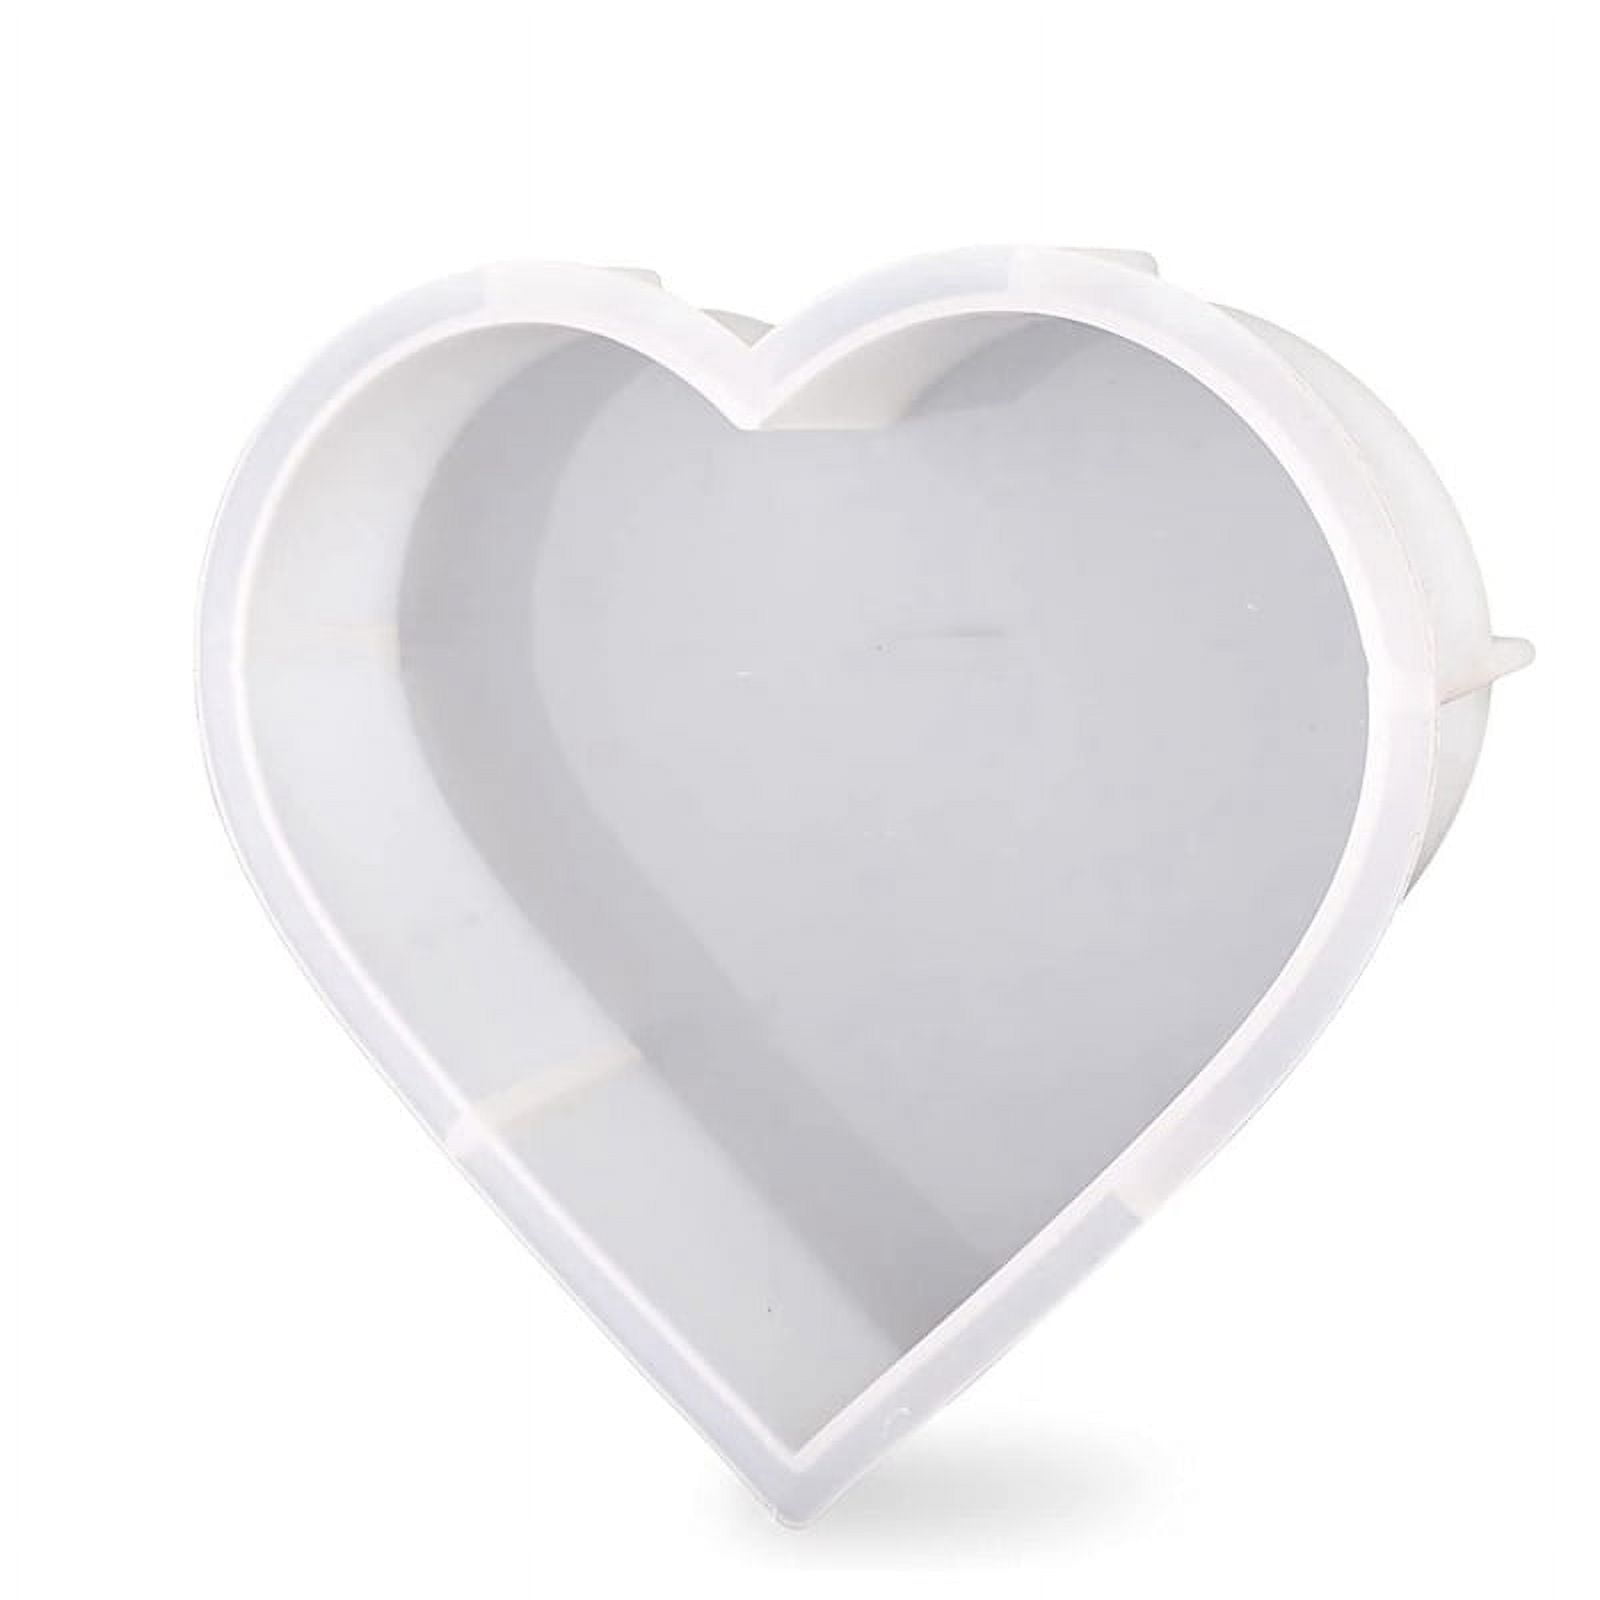 WILLBOND Heart Resin Silicone Molds for Resin Valentine's Day DIY Charms  Craft Heart Epoxy Mold Heart Shaped Casting Jewelry Mold (1)